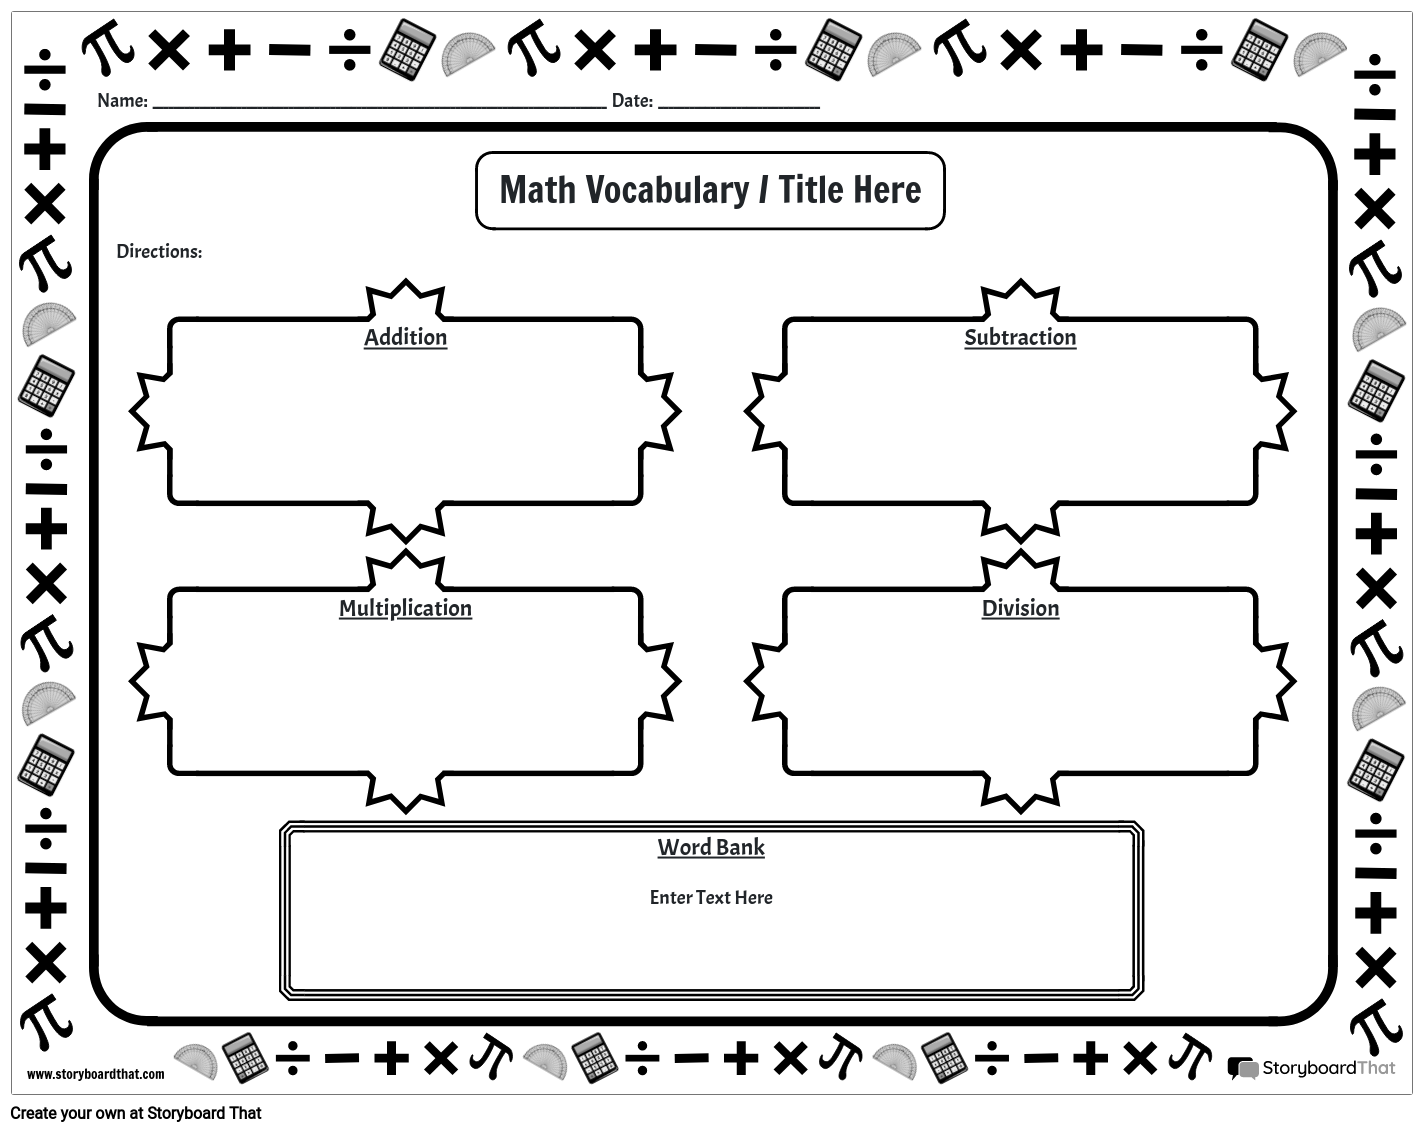 Landscape Math Vocabulary Worksheet with Different Shapes